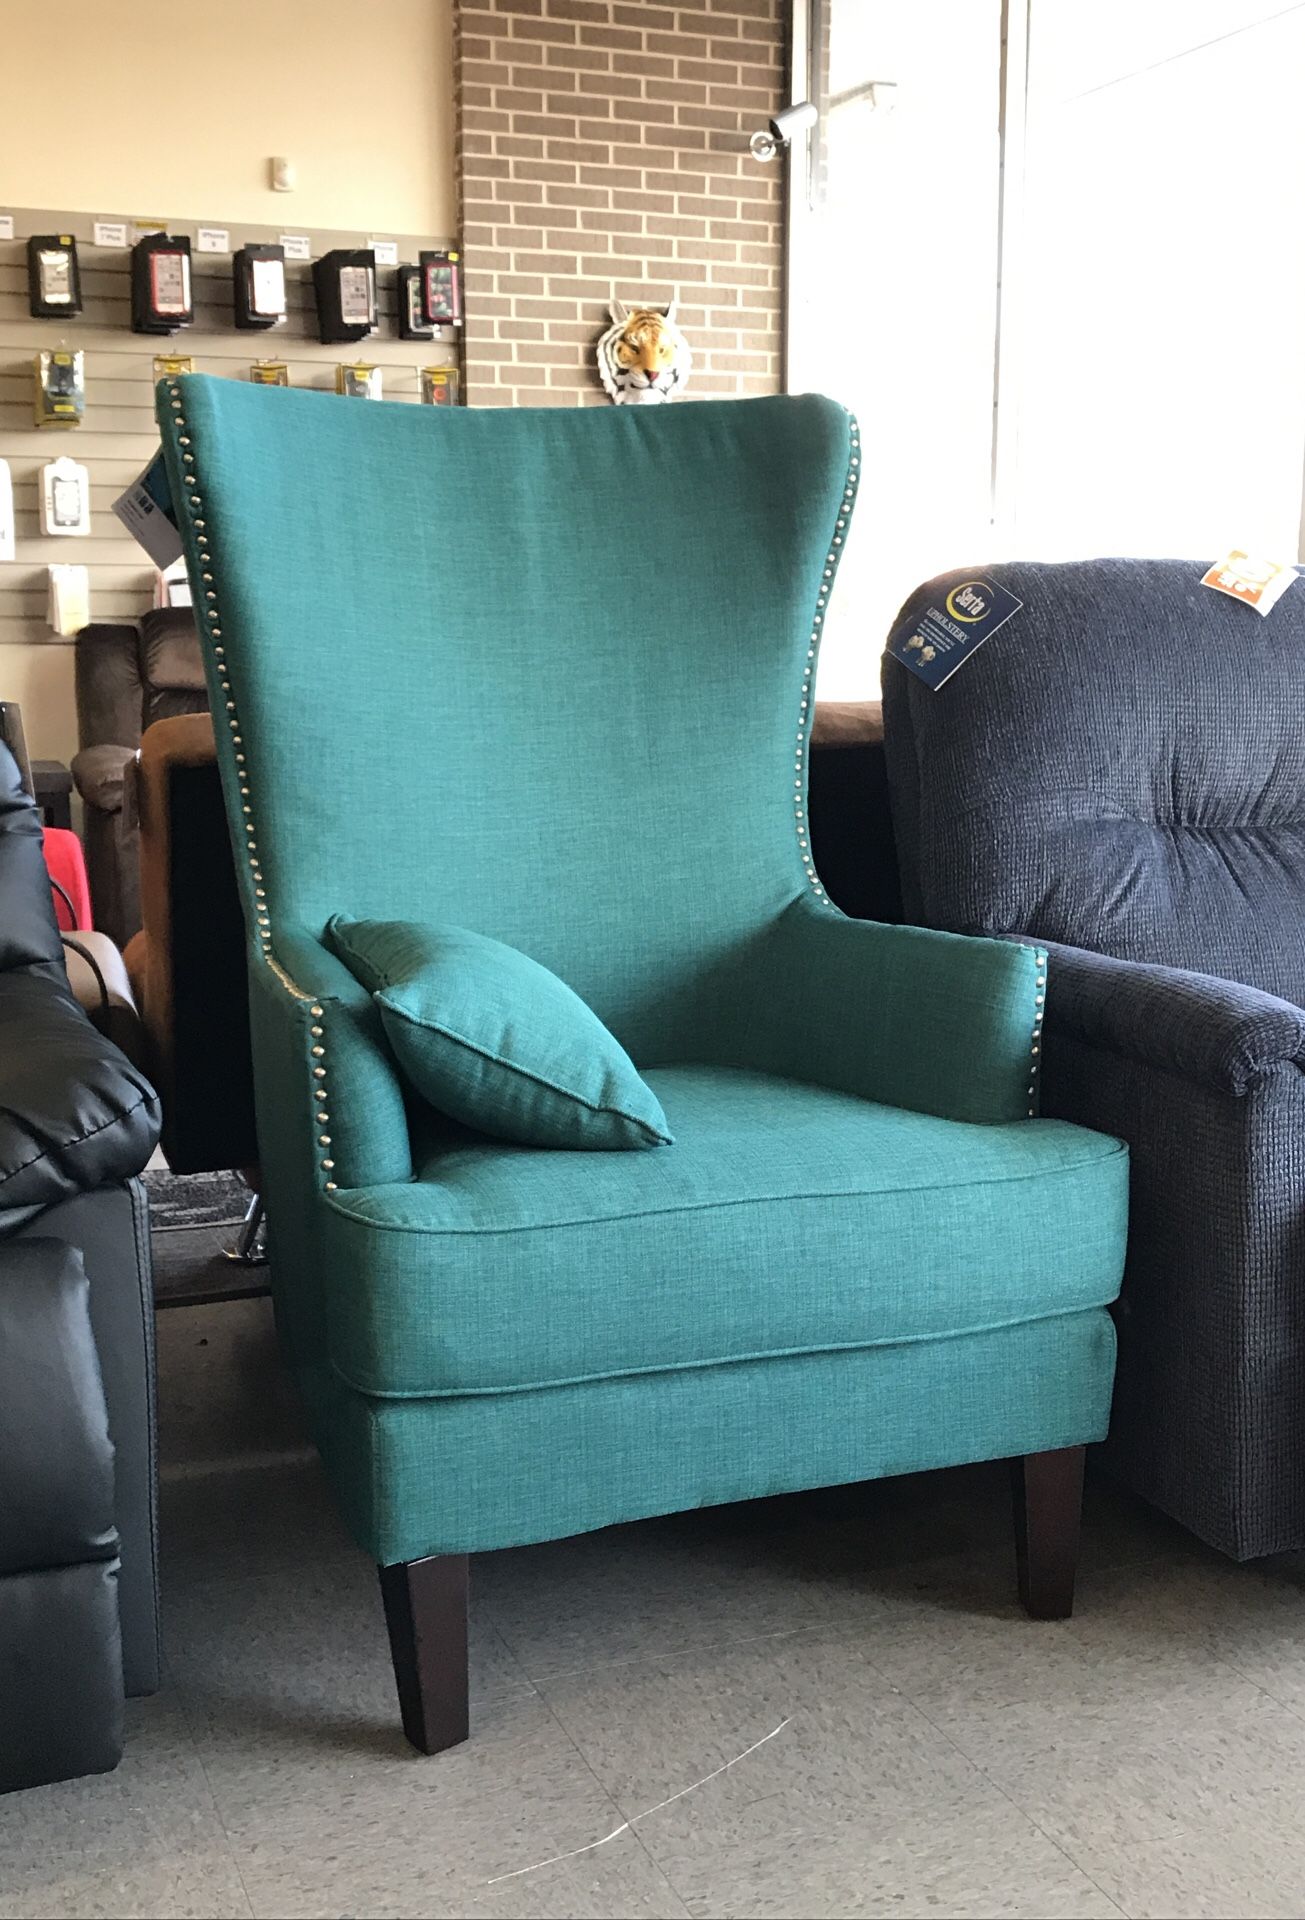 Brand new Wingback Chair